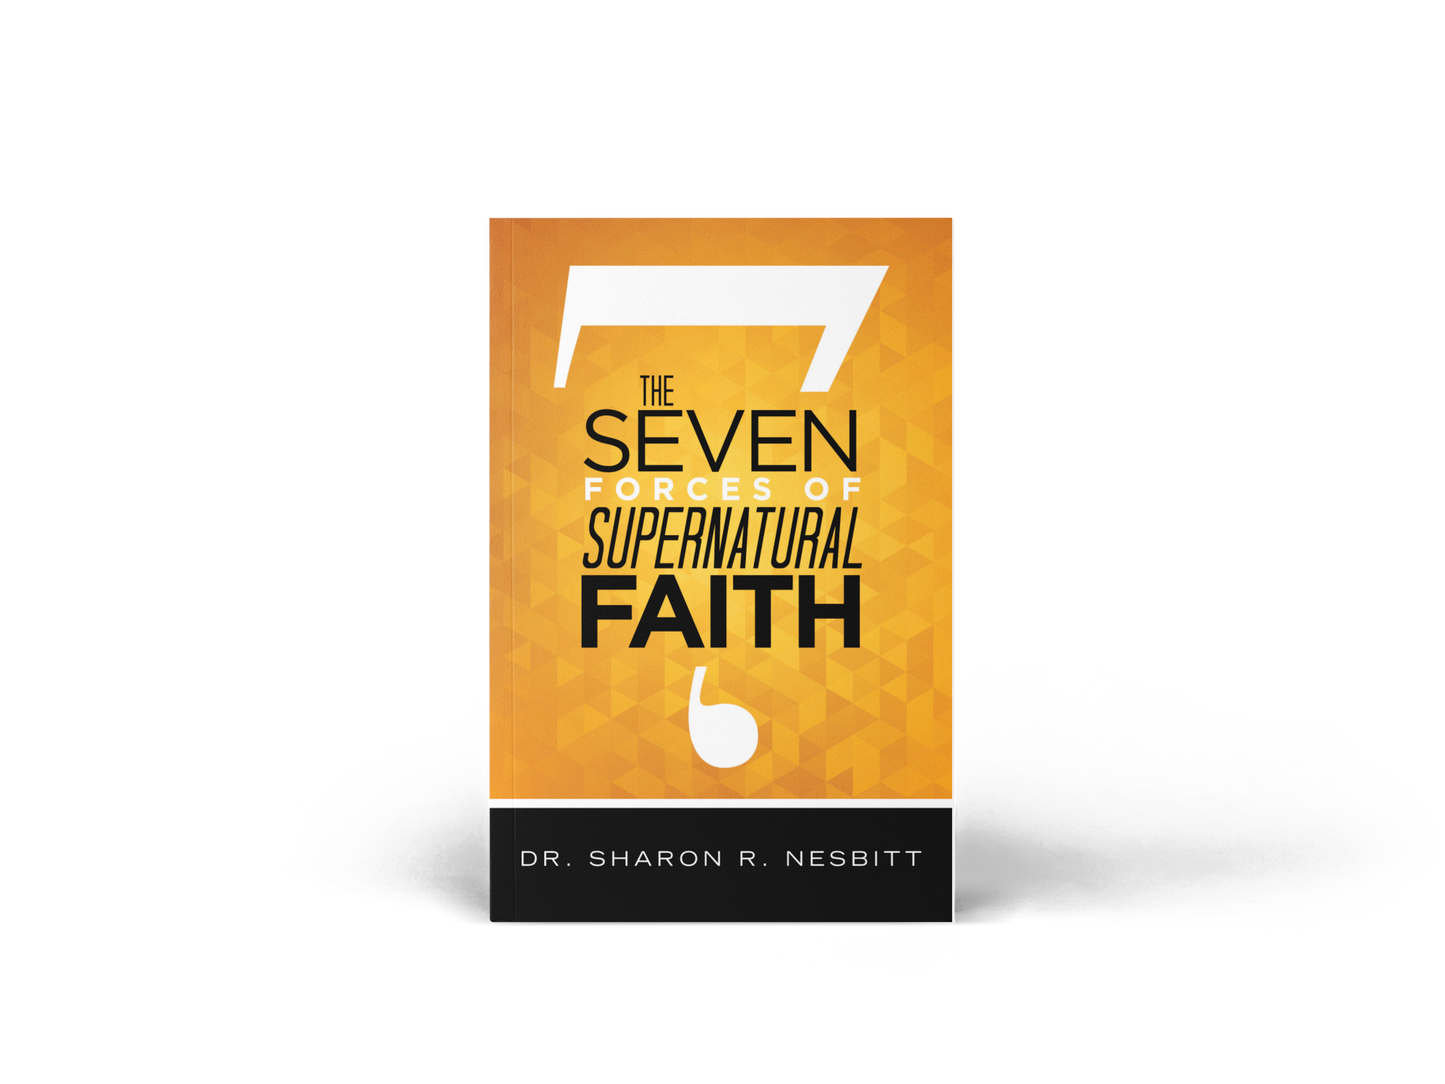 The Seven Forces of Supernatural Faith